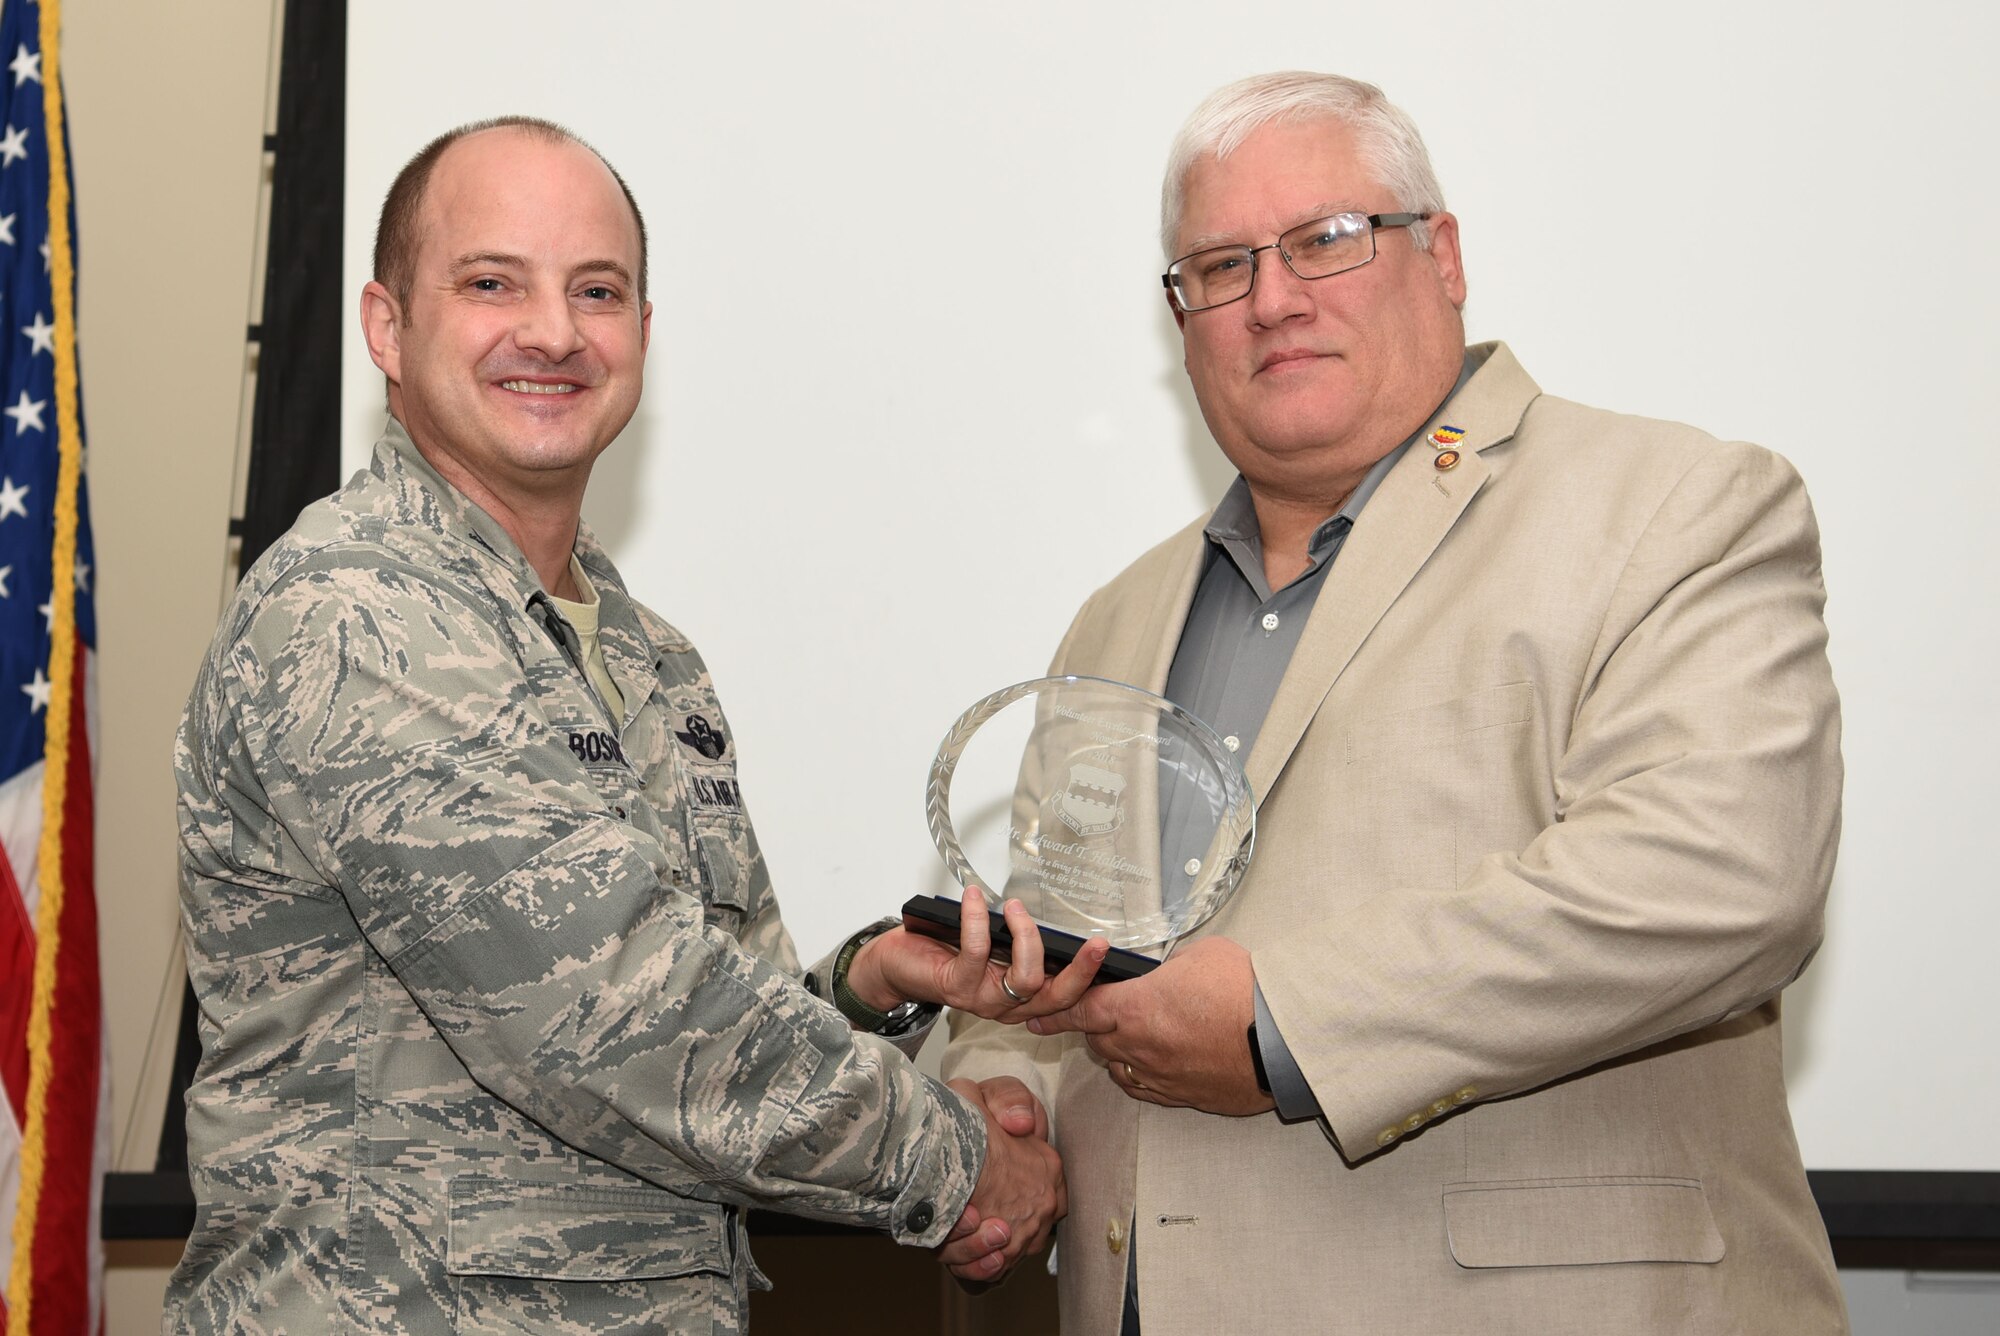 Edward Haldeman, 20th Fighter Wing (FW) Retirees Activities Office director, receives a Volunteer Excellence Award Nominee plaque from Col. John Bosone, 20th FW vice commander, during an annual volunteer recognition ceremony at Shaw Air Force Base, S.C., April 19, 2018.